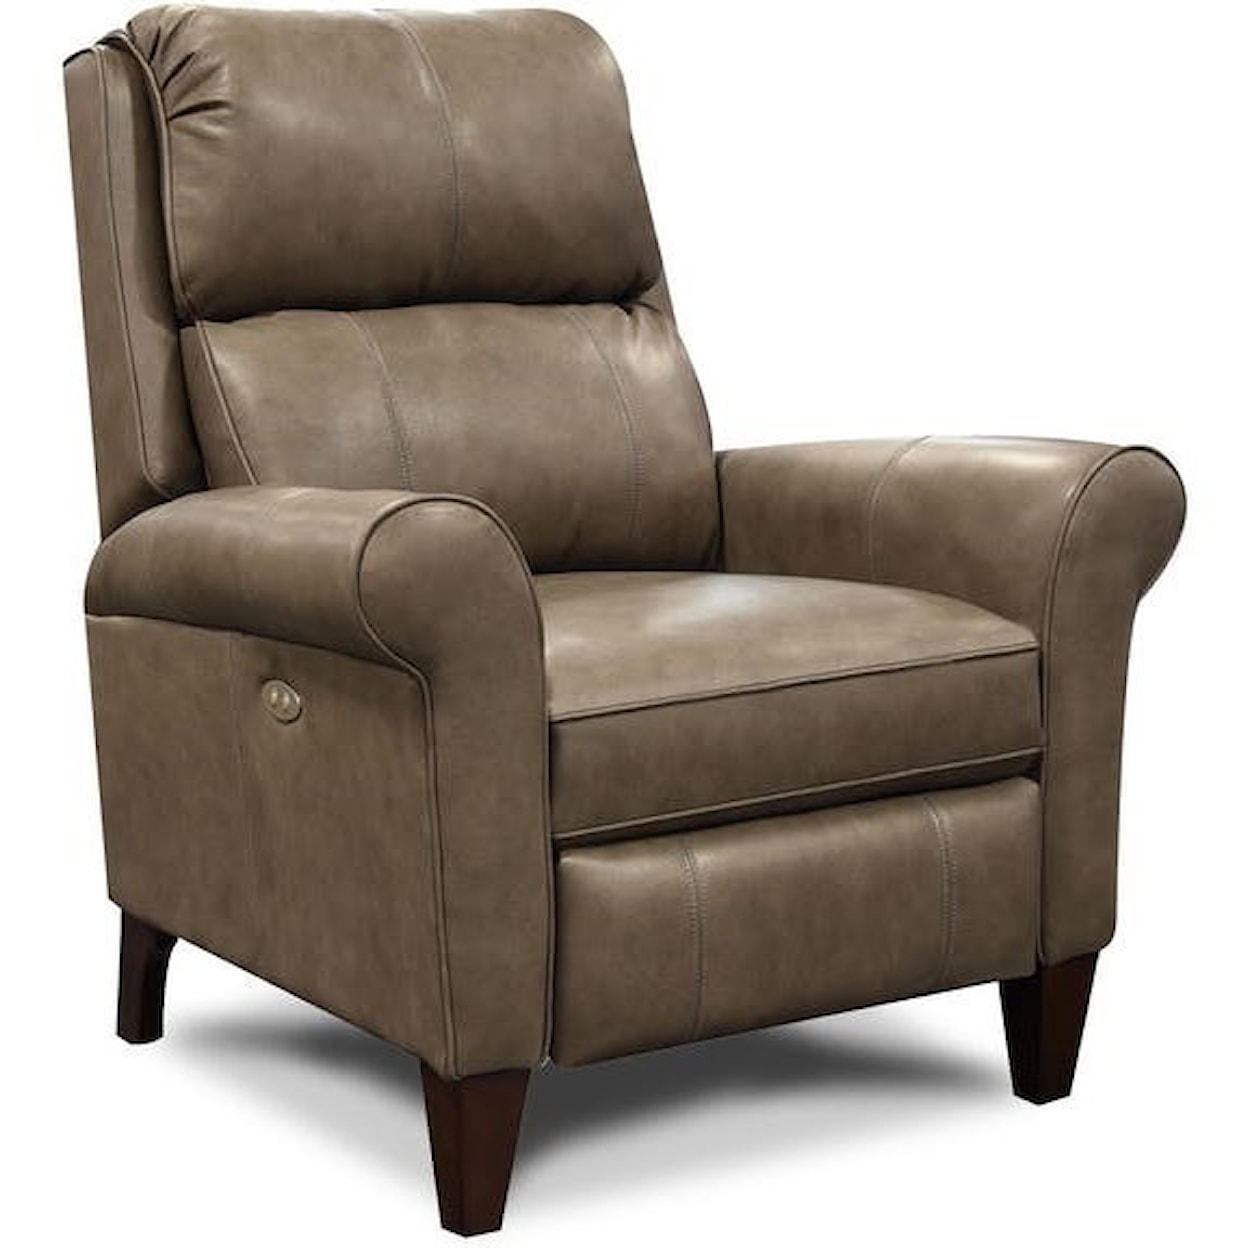 England 3D00/AL Series Leather Reclining Chair